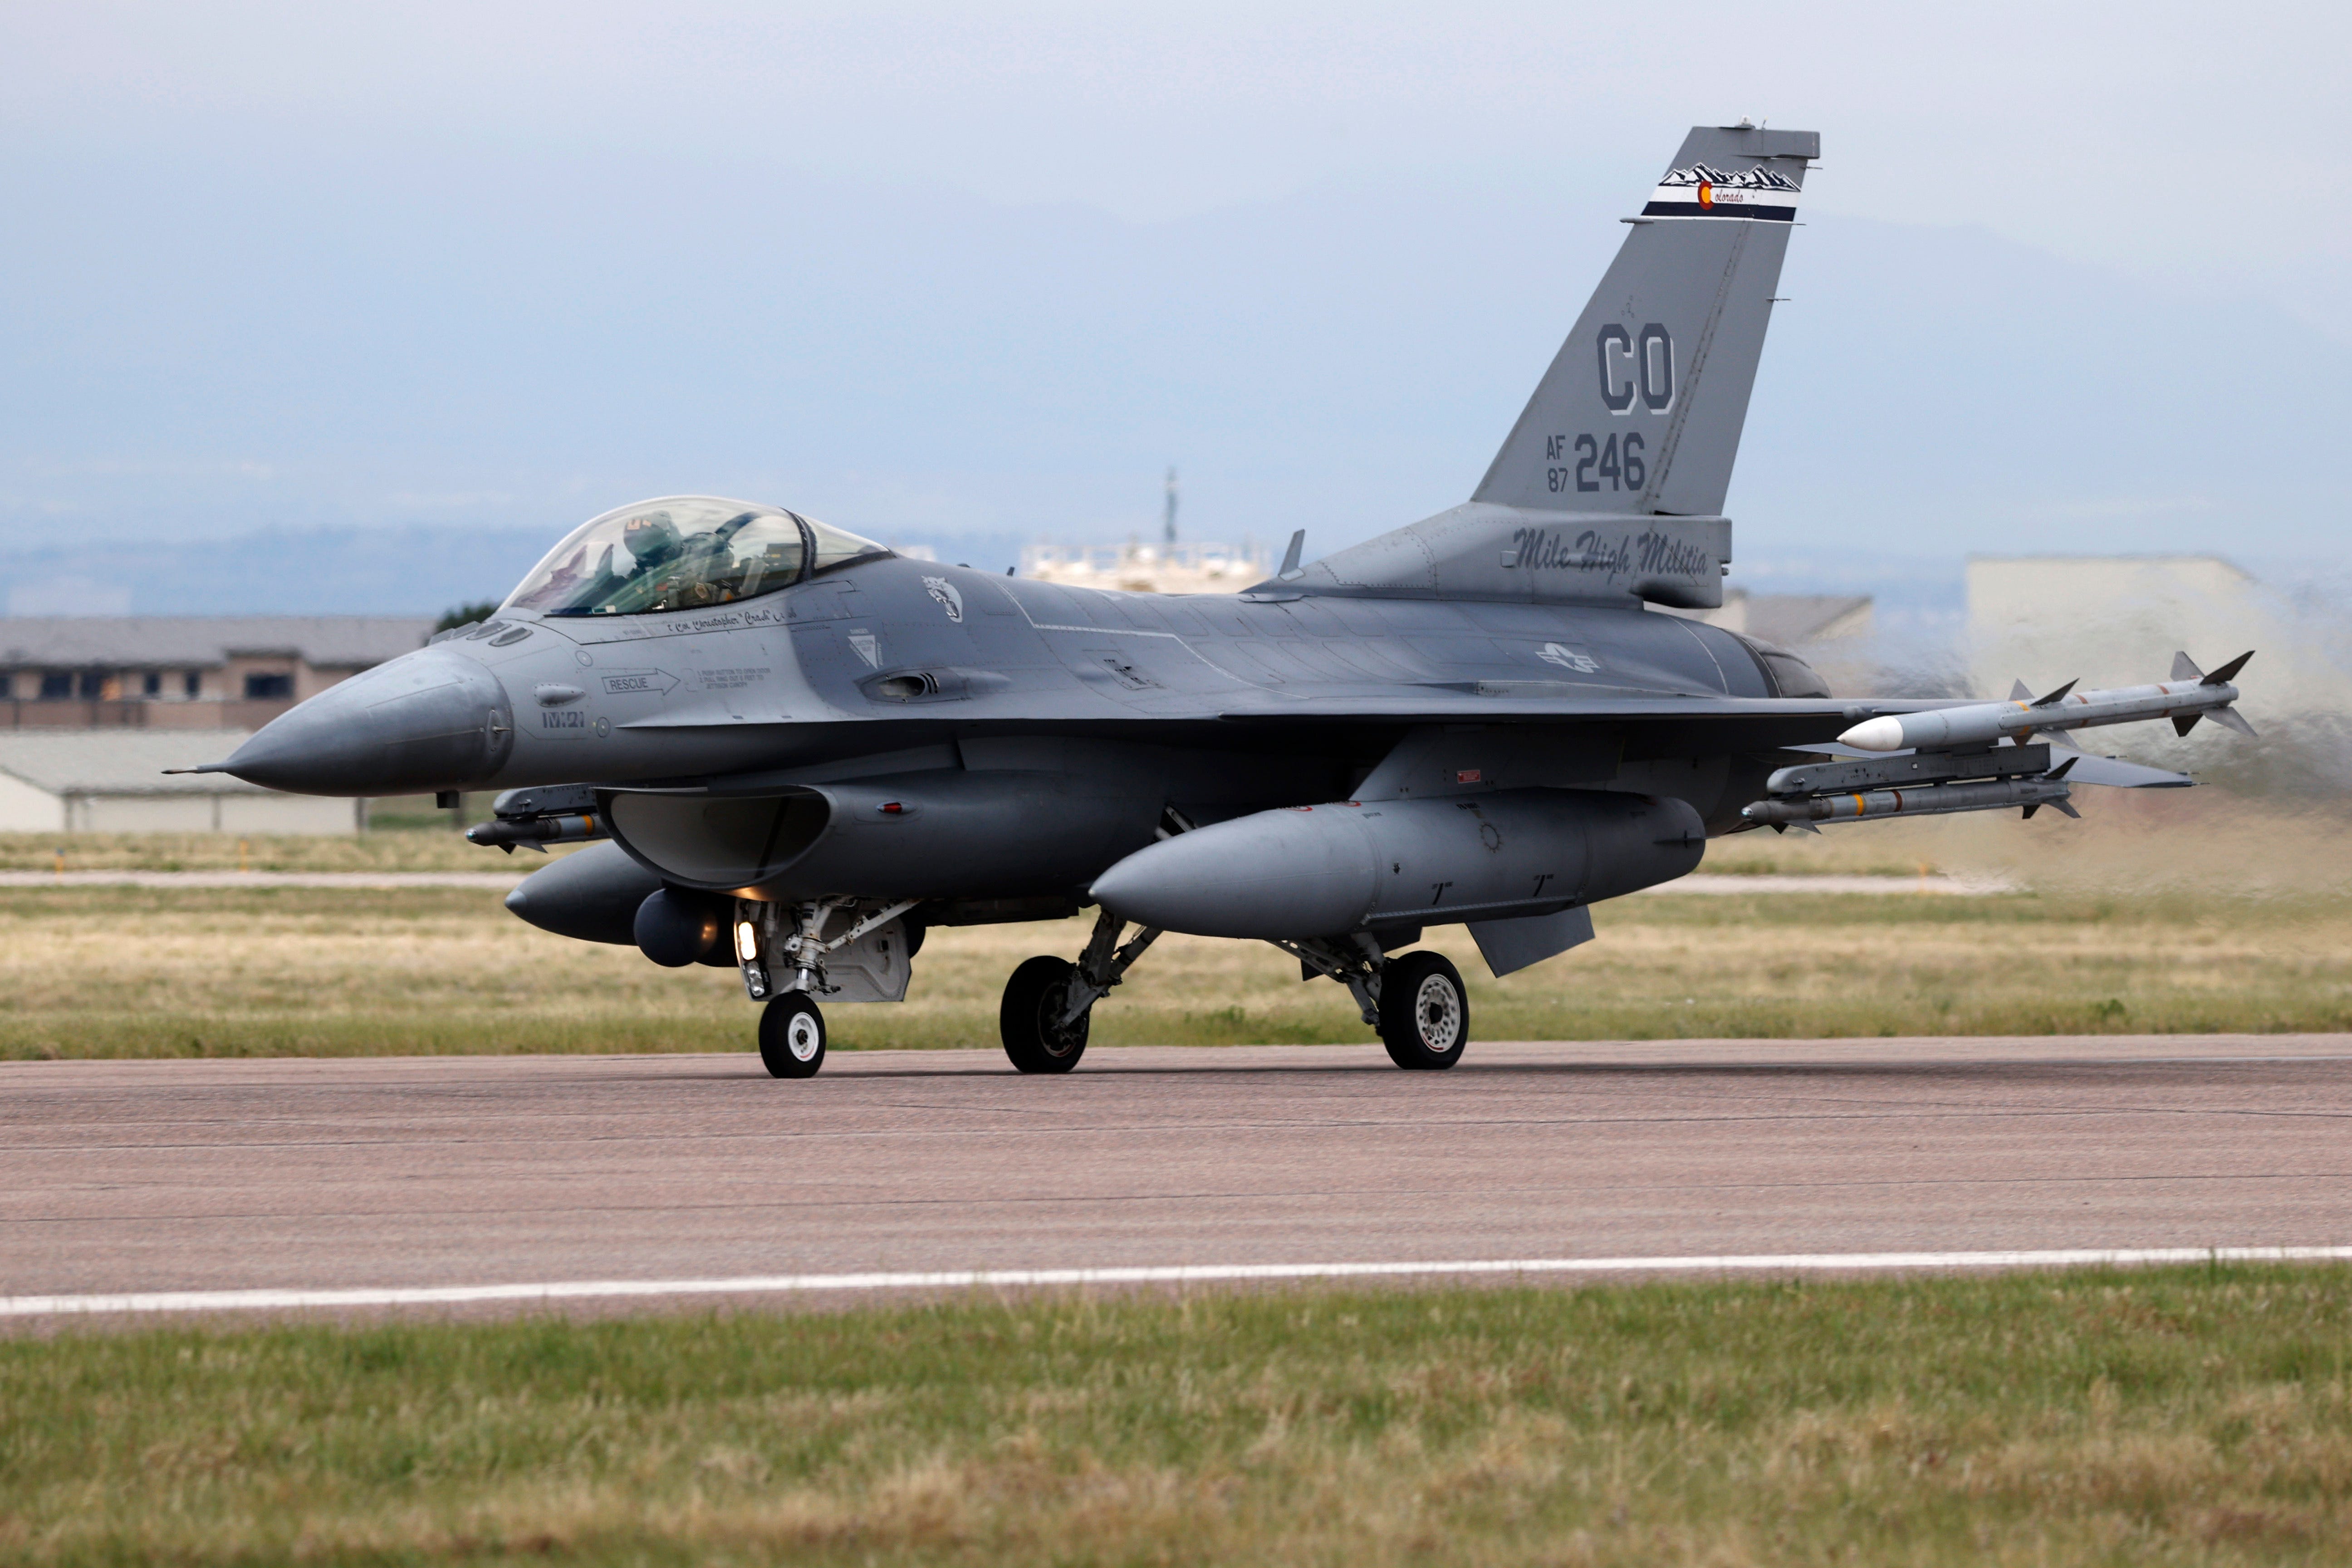 F-16 fighters chased unresponsive plane near DC area before it crashed in Virginia, officials say